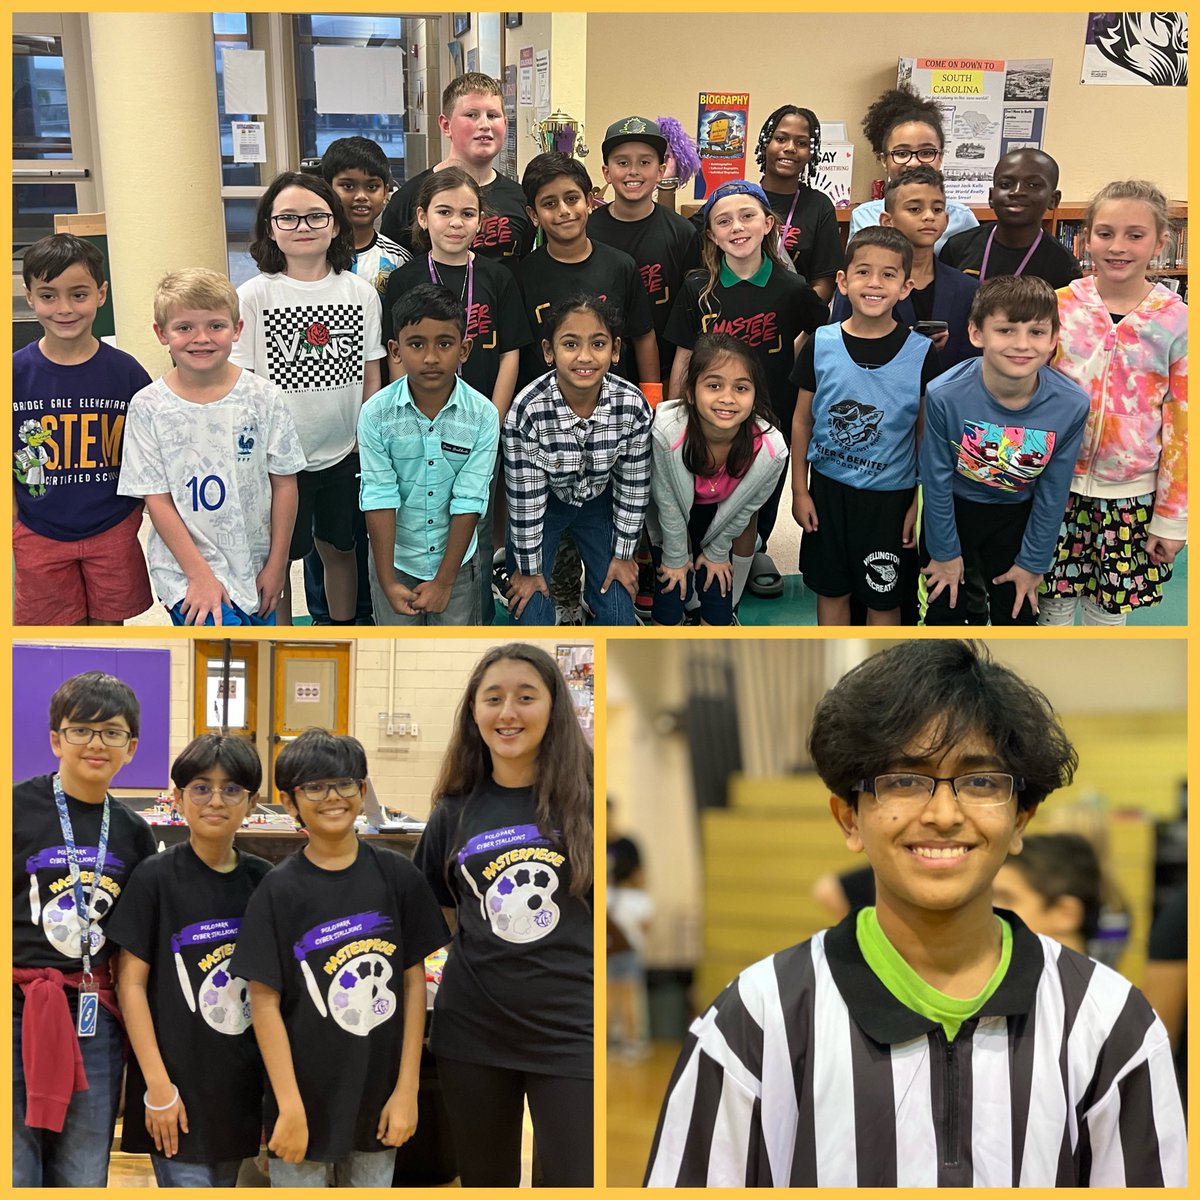 So proud!💕 @ElbridgeGaleES @firstlegoleague teams participated in Explore and Challenge competitions today. Our talented alumni also volunteered at the @southFLrobotics Qualifier and are thriving on @FLLFlorida teams in middle and high school. 🐊 @FIRSTinFlorida @tchr_mama